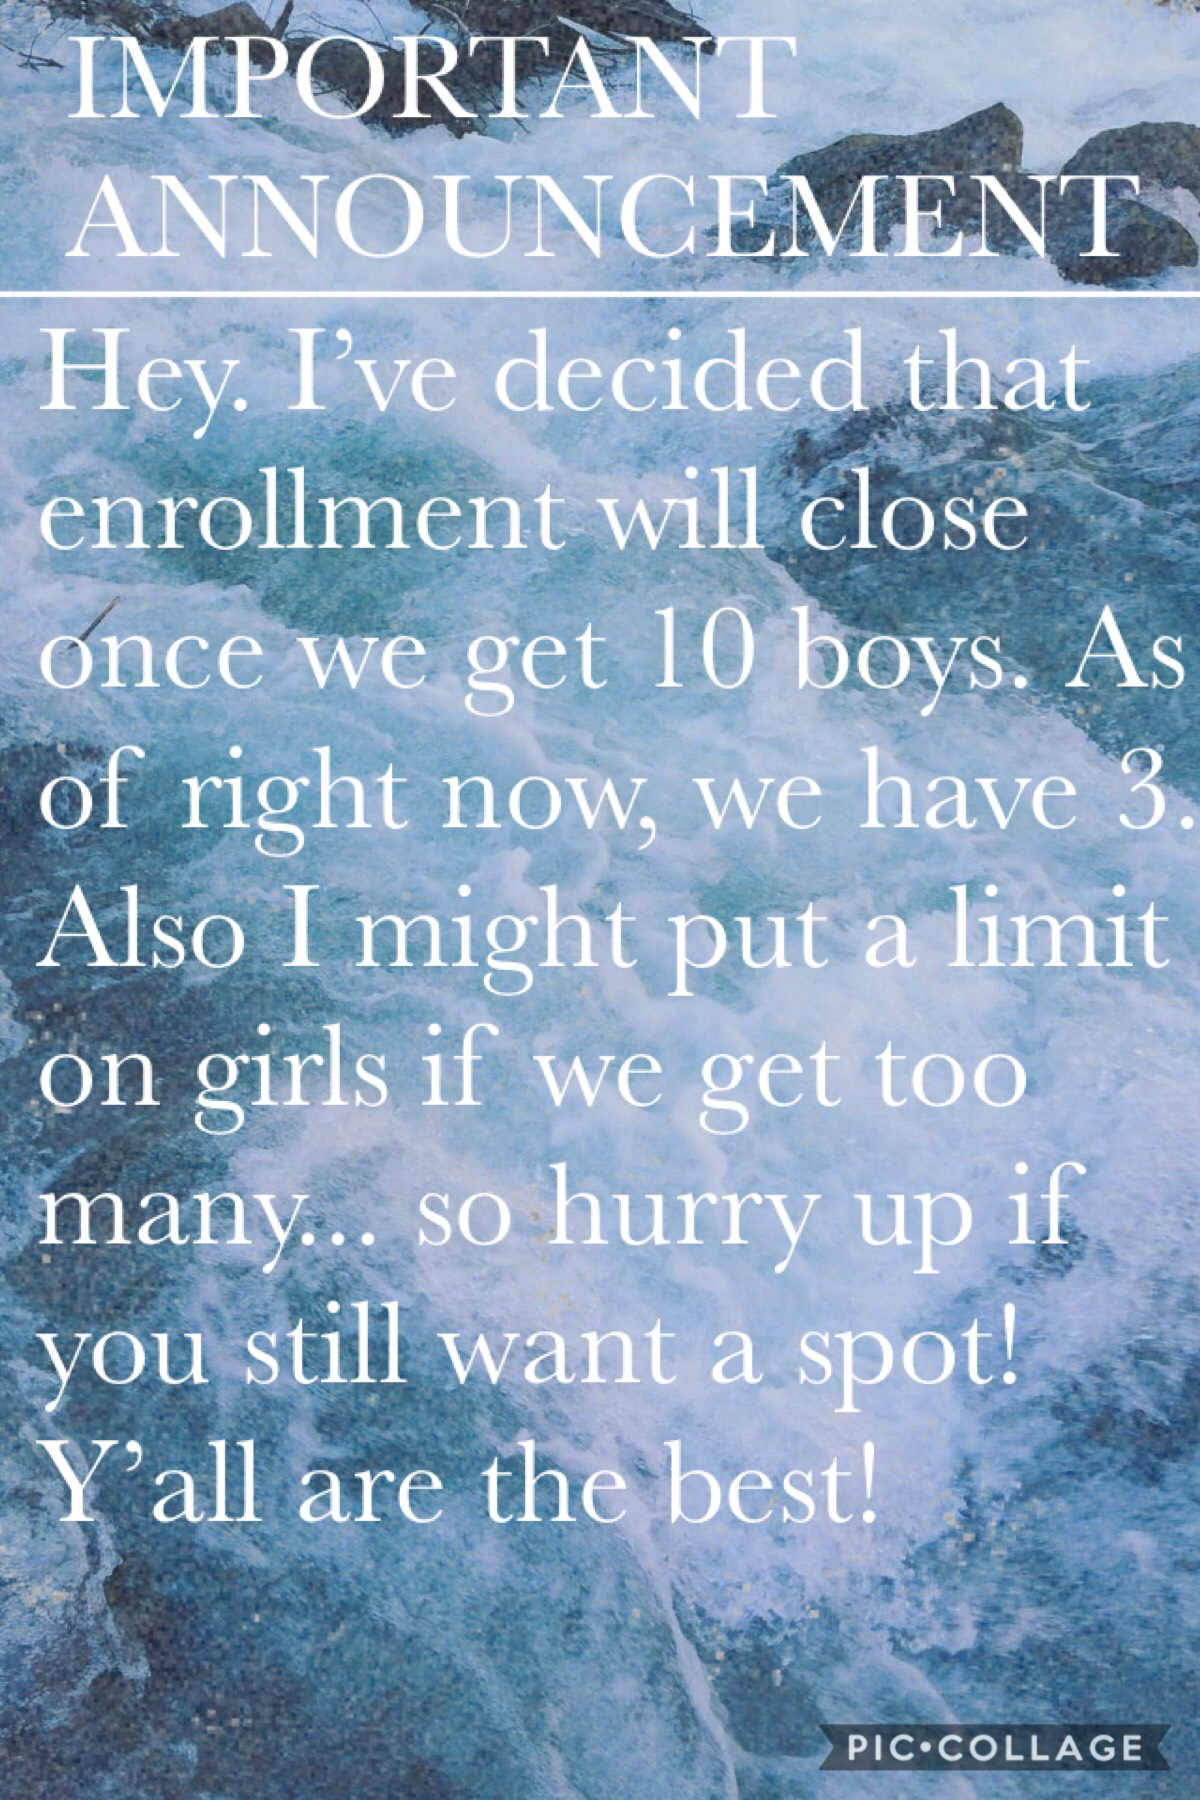 You will also get your roommate once enrollment closes